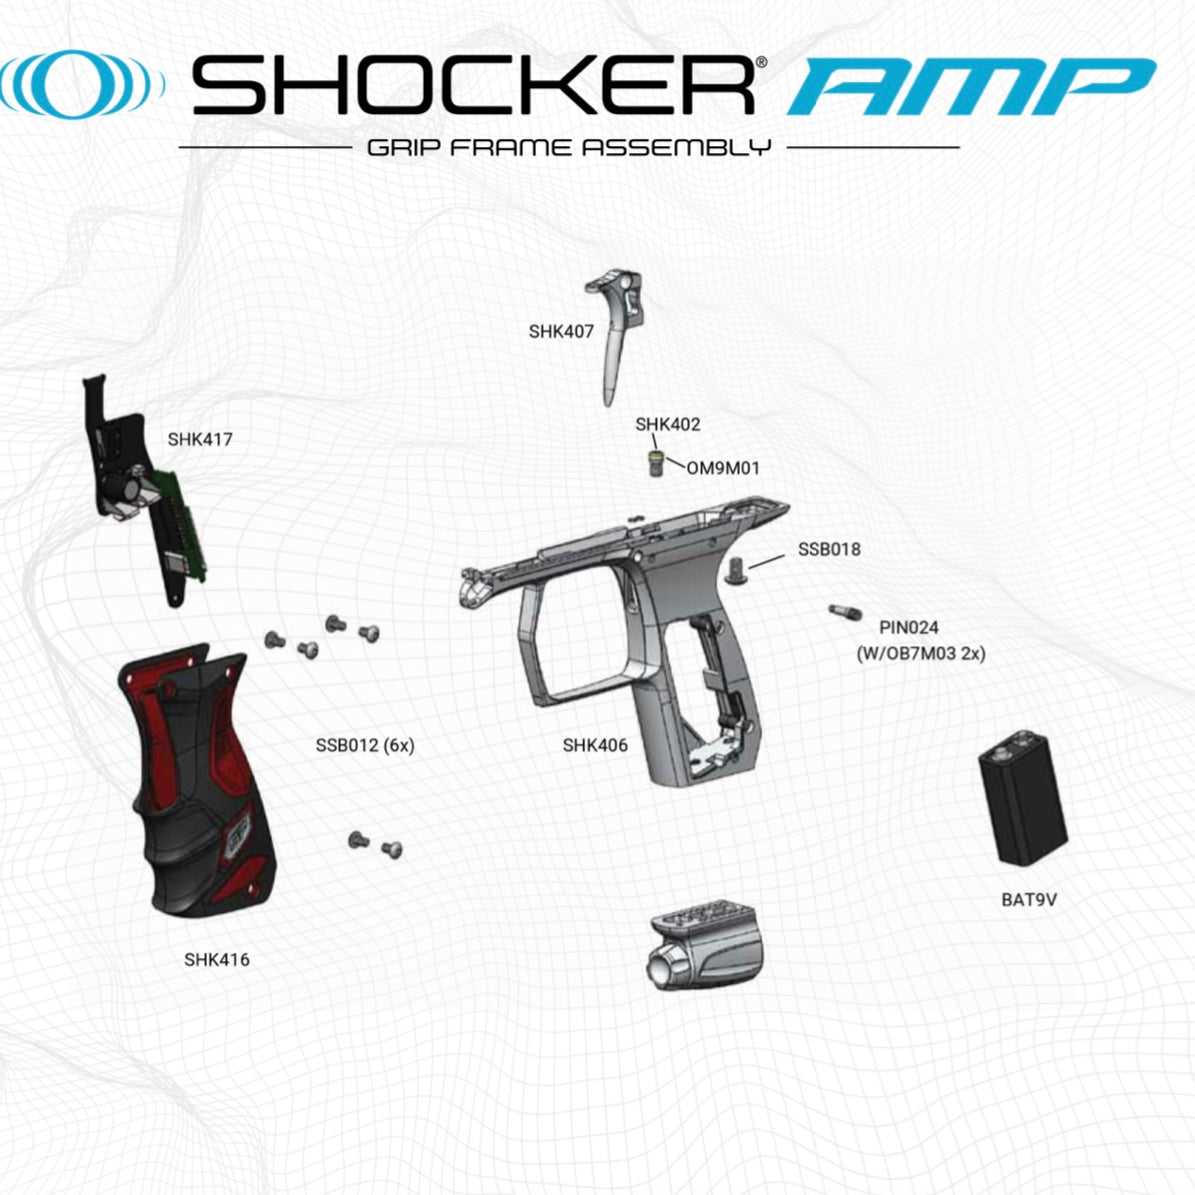 SP Shocker Amp Grip Frame Parts List - Pick the Part You Need!